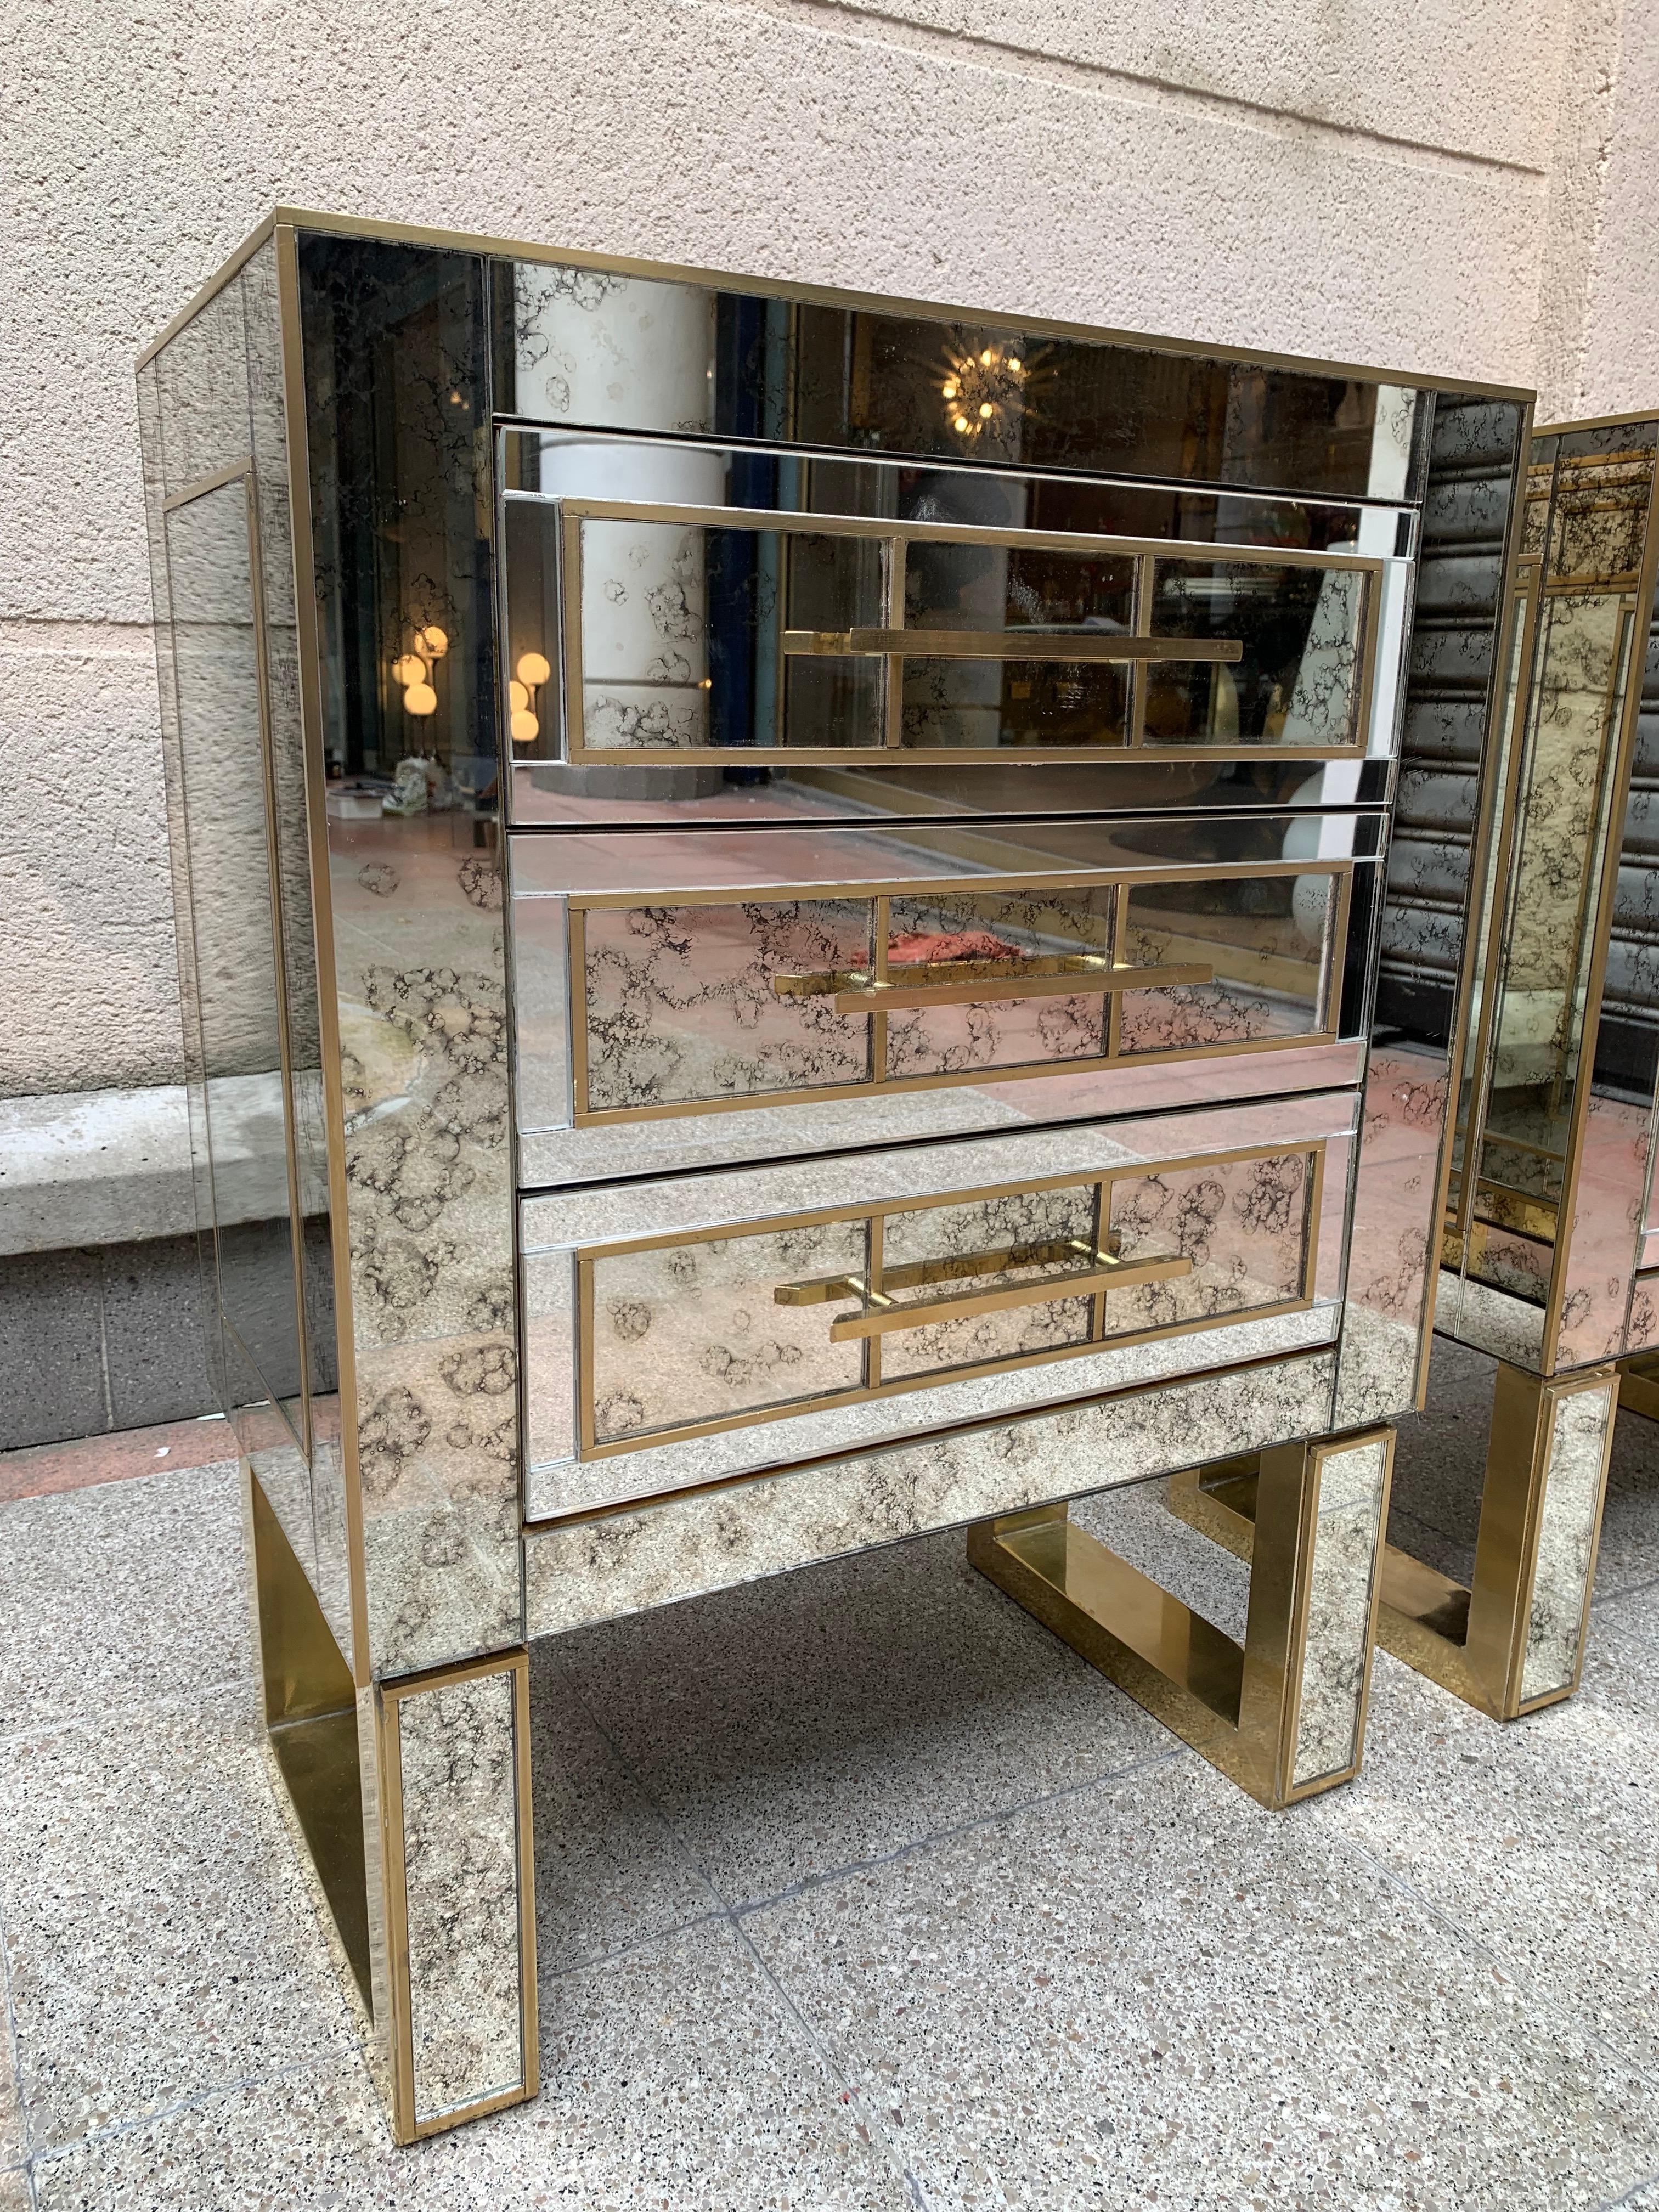 Pair of aged mirror bedside tables
Italian work, circa 1980

3 drawers

Dimensions: 54 x 31 x H 70.